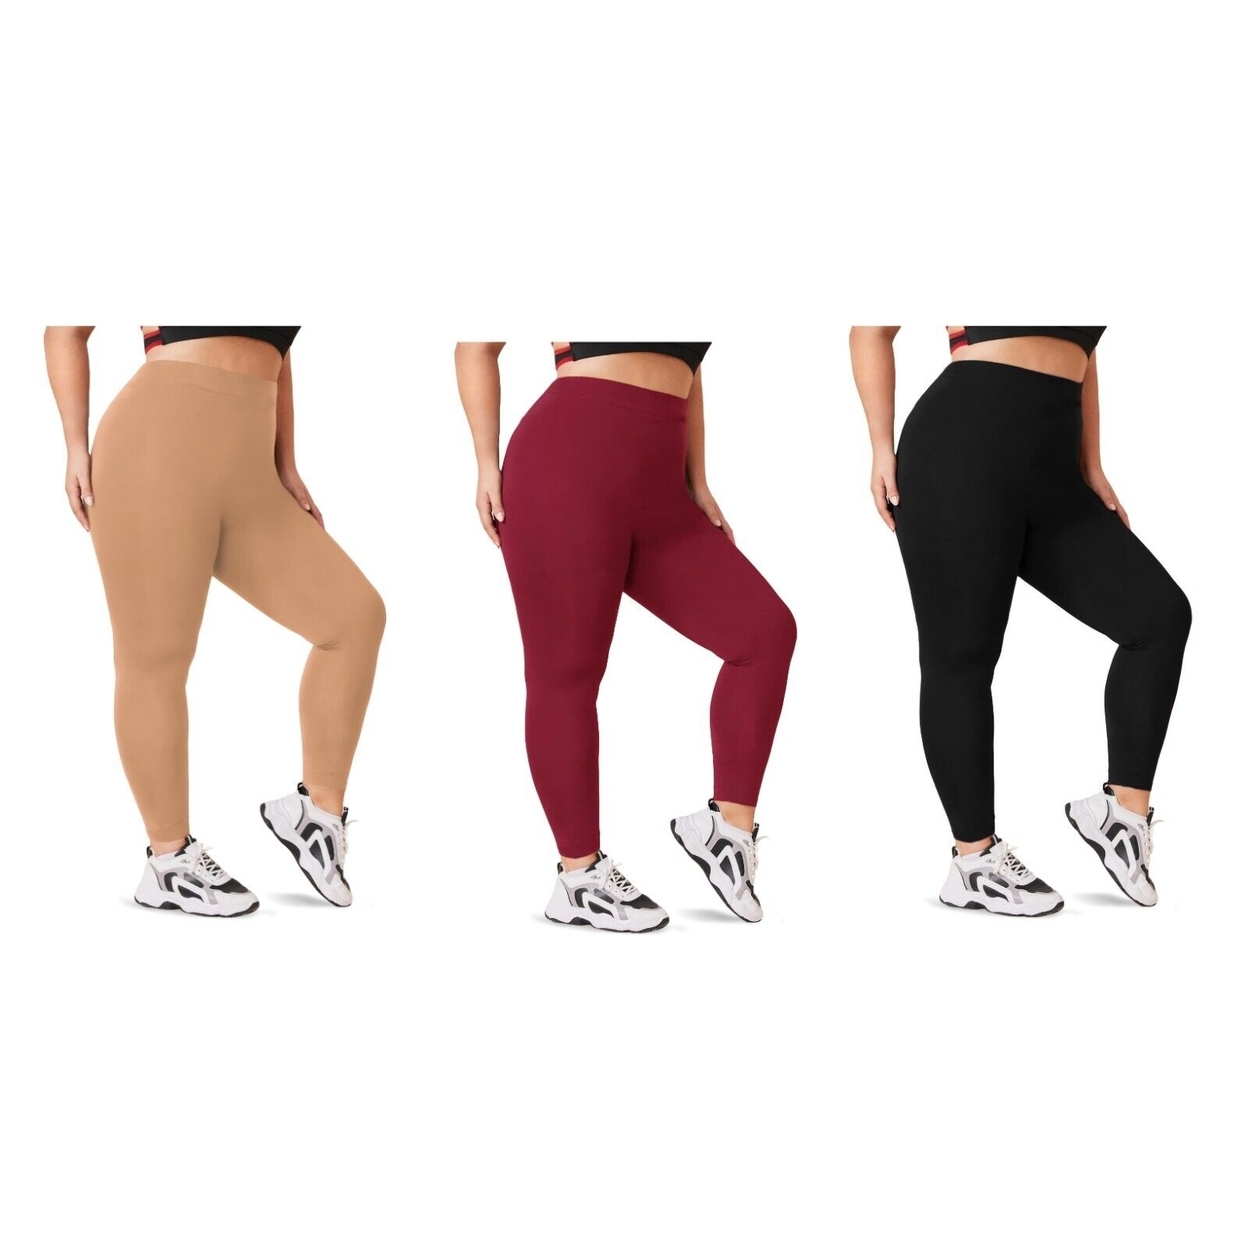 2-Pack: Women's Casual Ultra-Soft Smooth High Waisted Athletic Active Yoga Leggings Plus Size Available - Beige & Beige, 3x